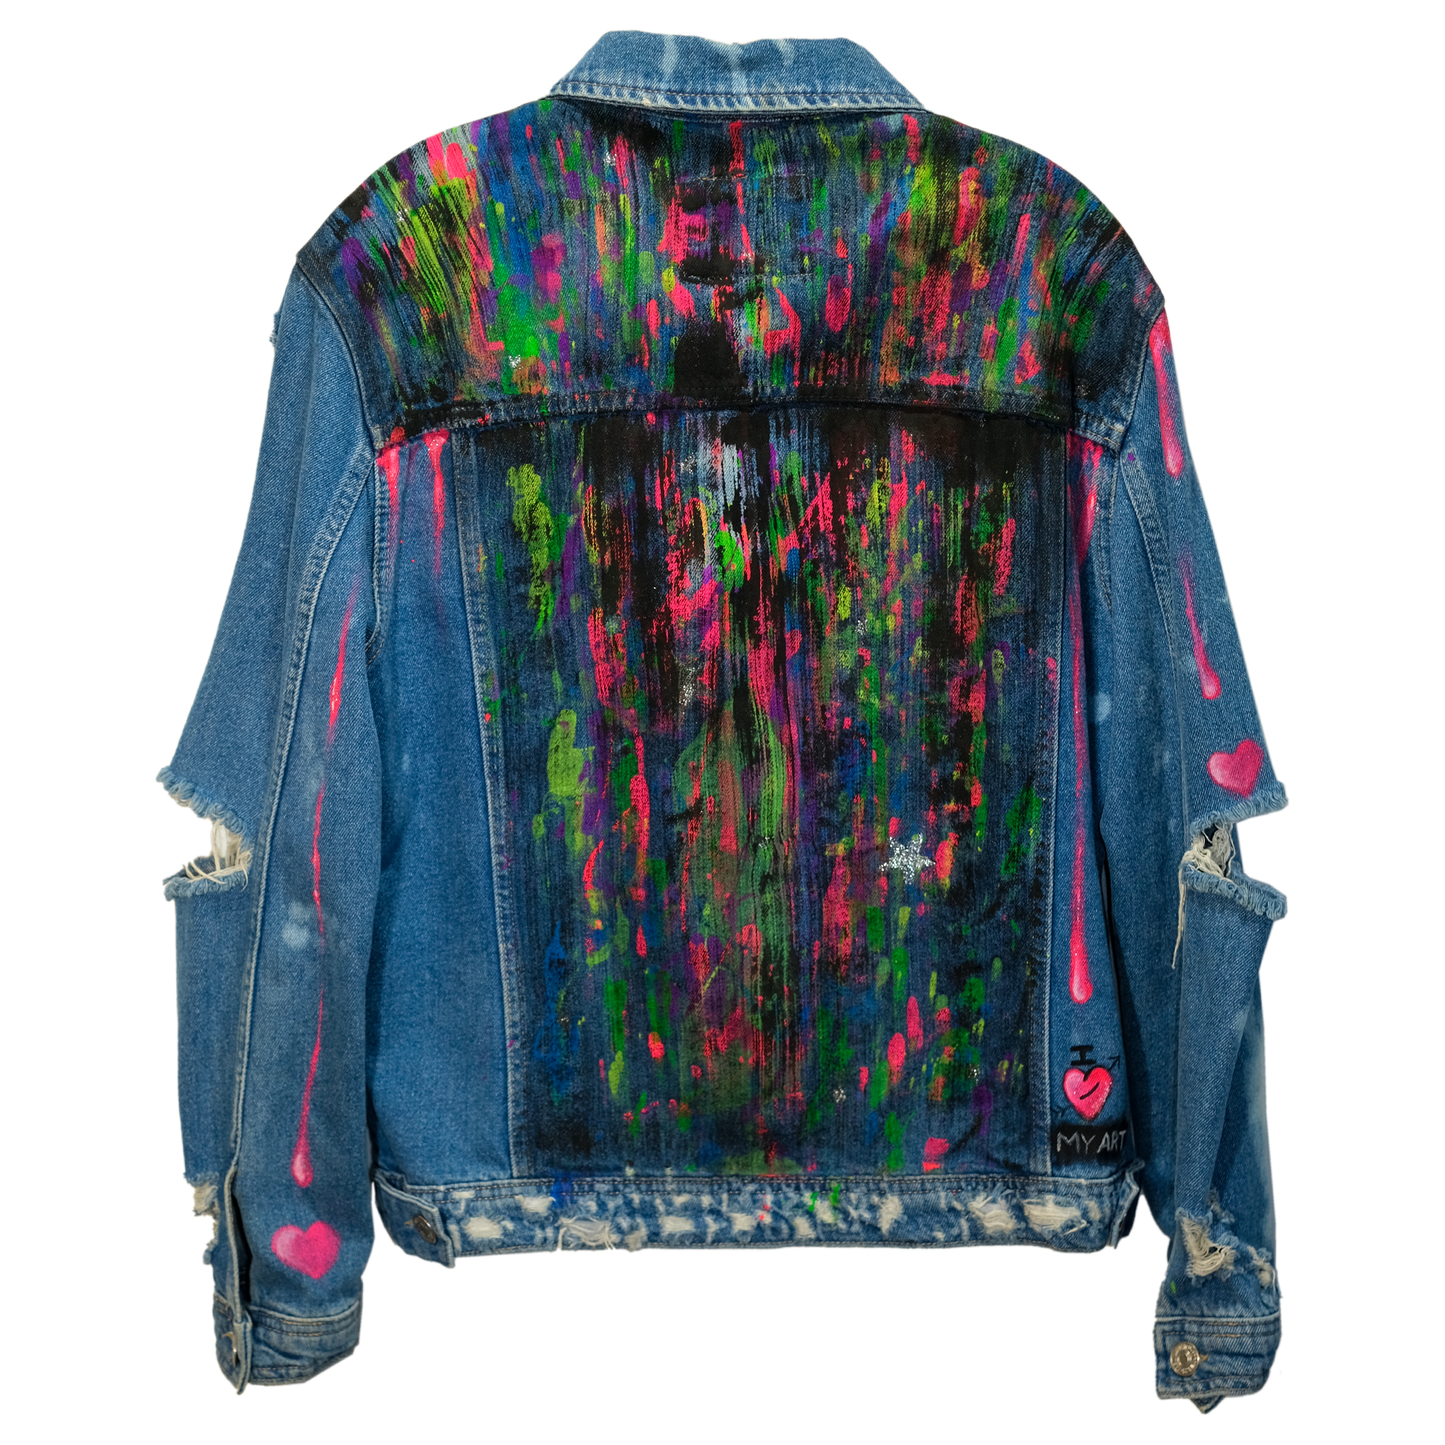 "It's My Birthday" - Up-cycled Forever 21 Denim Jacket - Size Large - Hand Painted by Skye De La Rosa